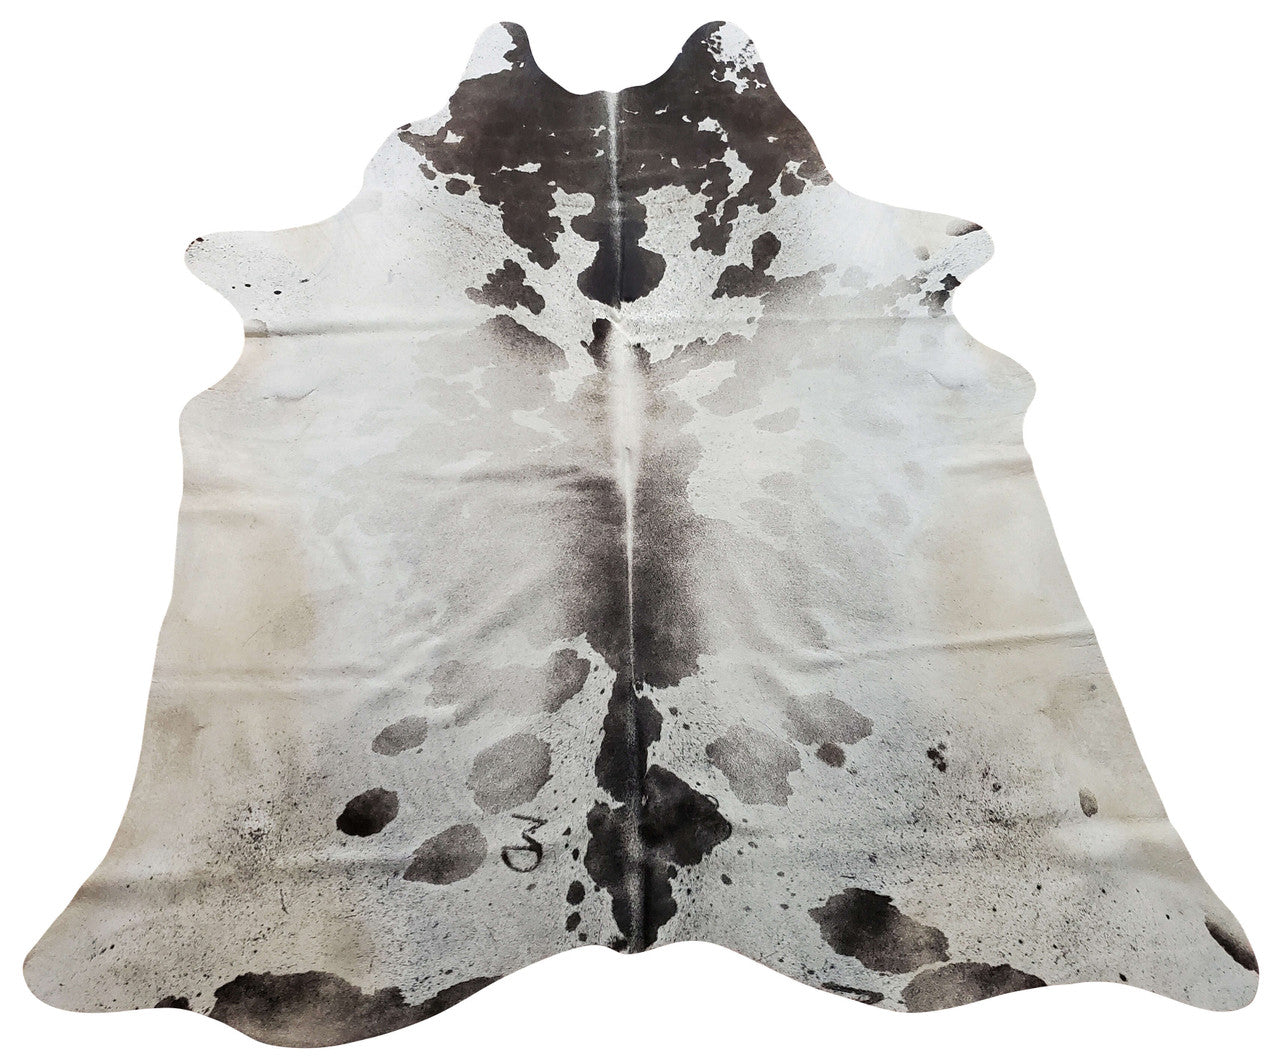 Received my cowhide rug yesterday, I am absolutely delighted, the quality is so much better than the pictures depicted! The hair is glossy and soft, the tanned side is clean and of excellent quality